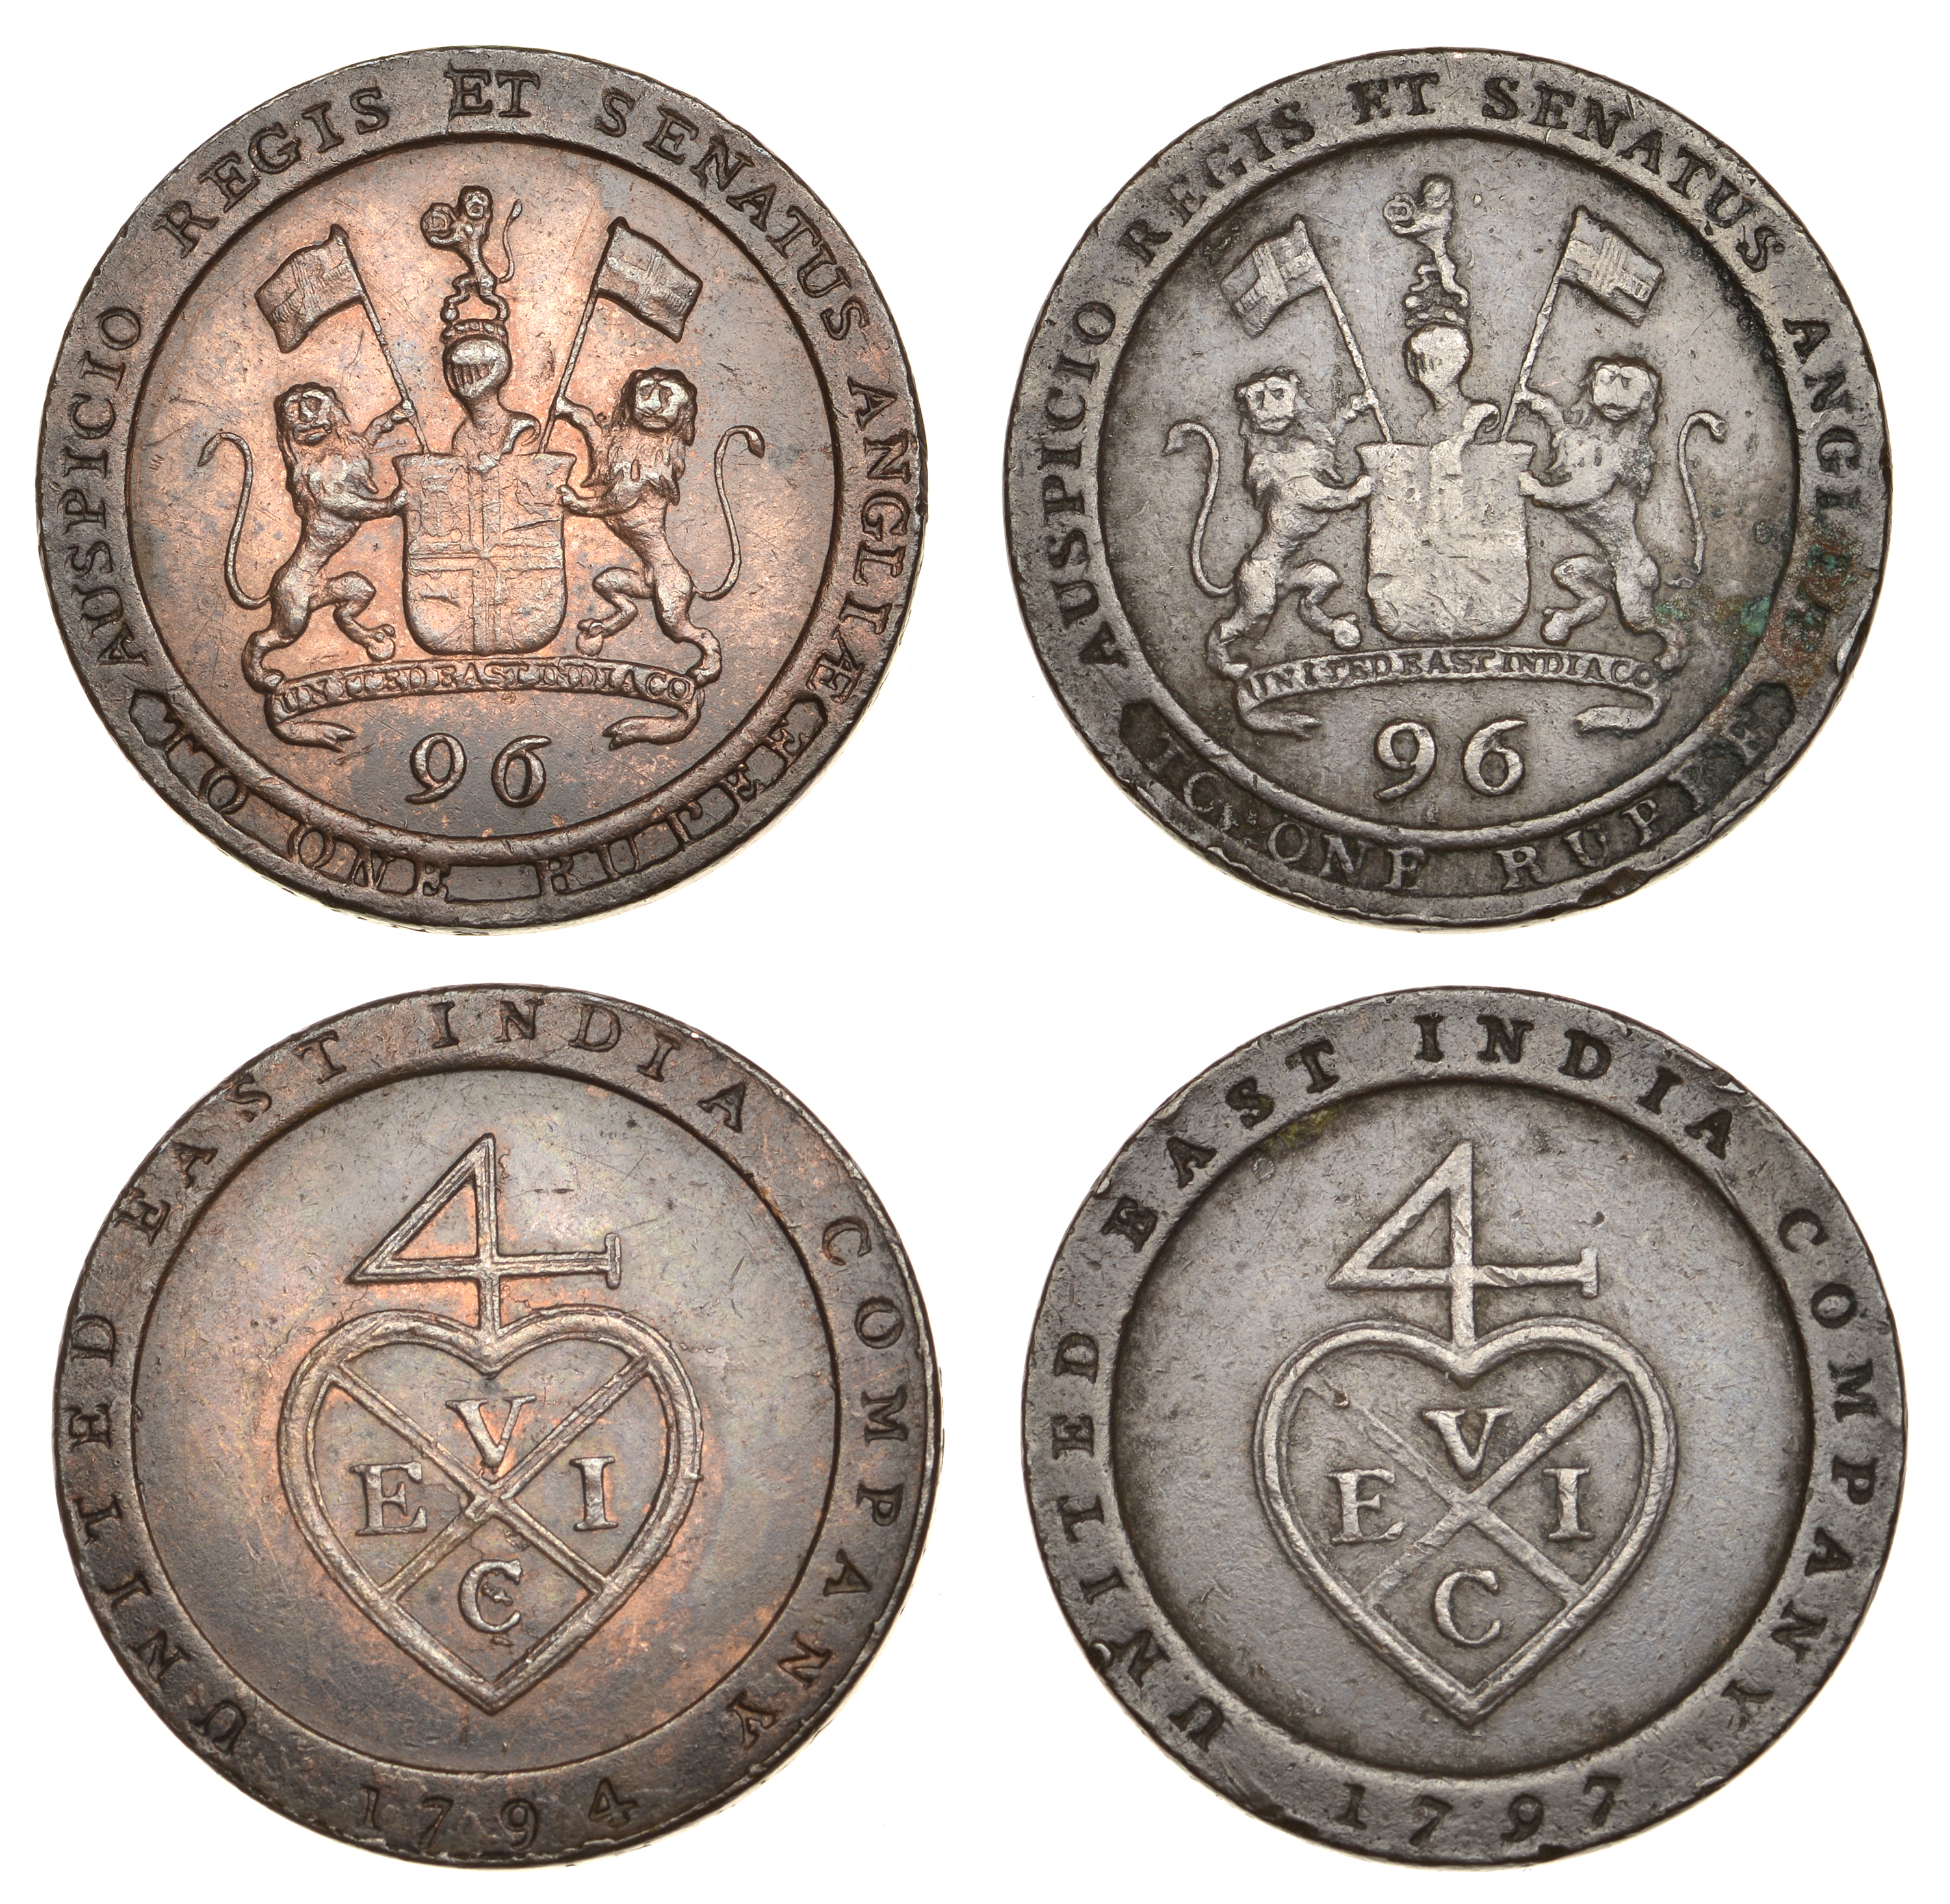 East India Company, Madras Presidency, Northern Circars: European style coinages, Soho, copp...